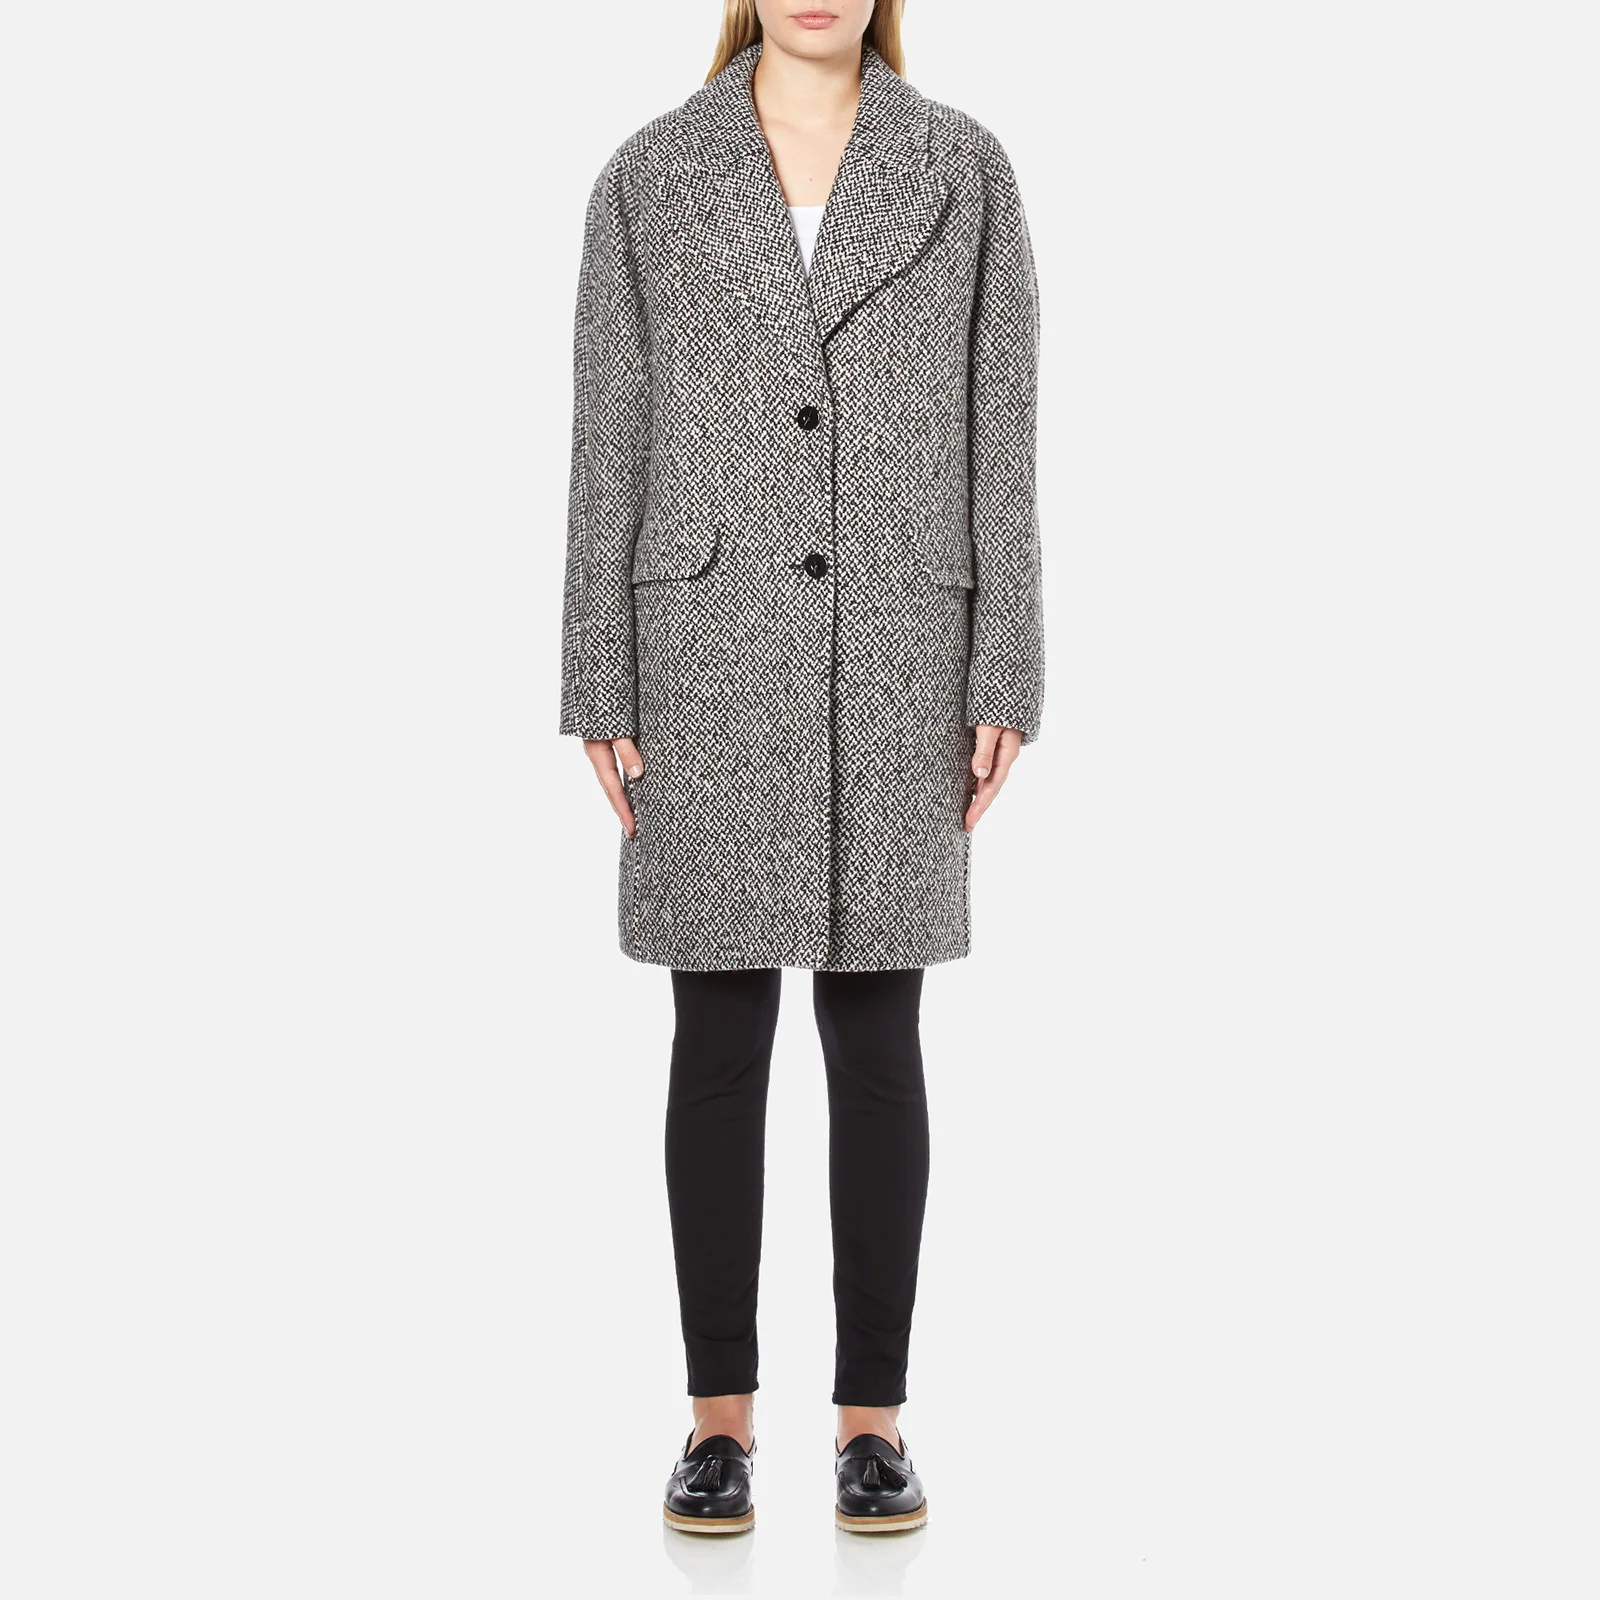 Carven Women's Oversized Two Buttoned Coat - White/Black Image 1